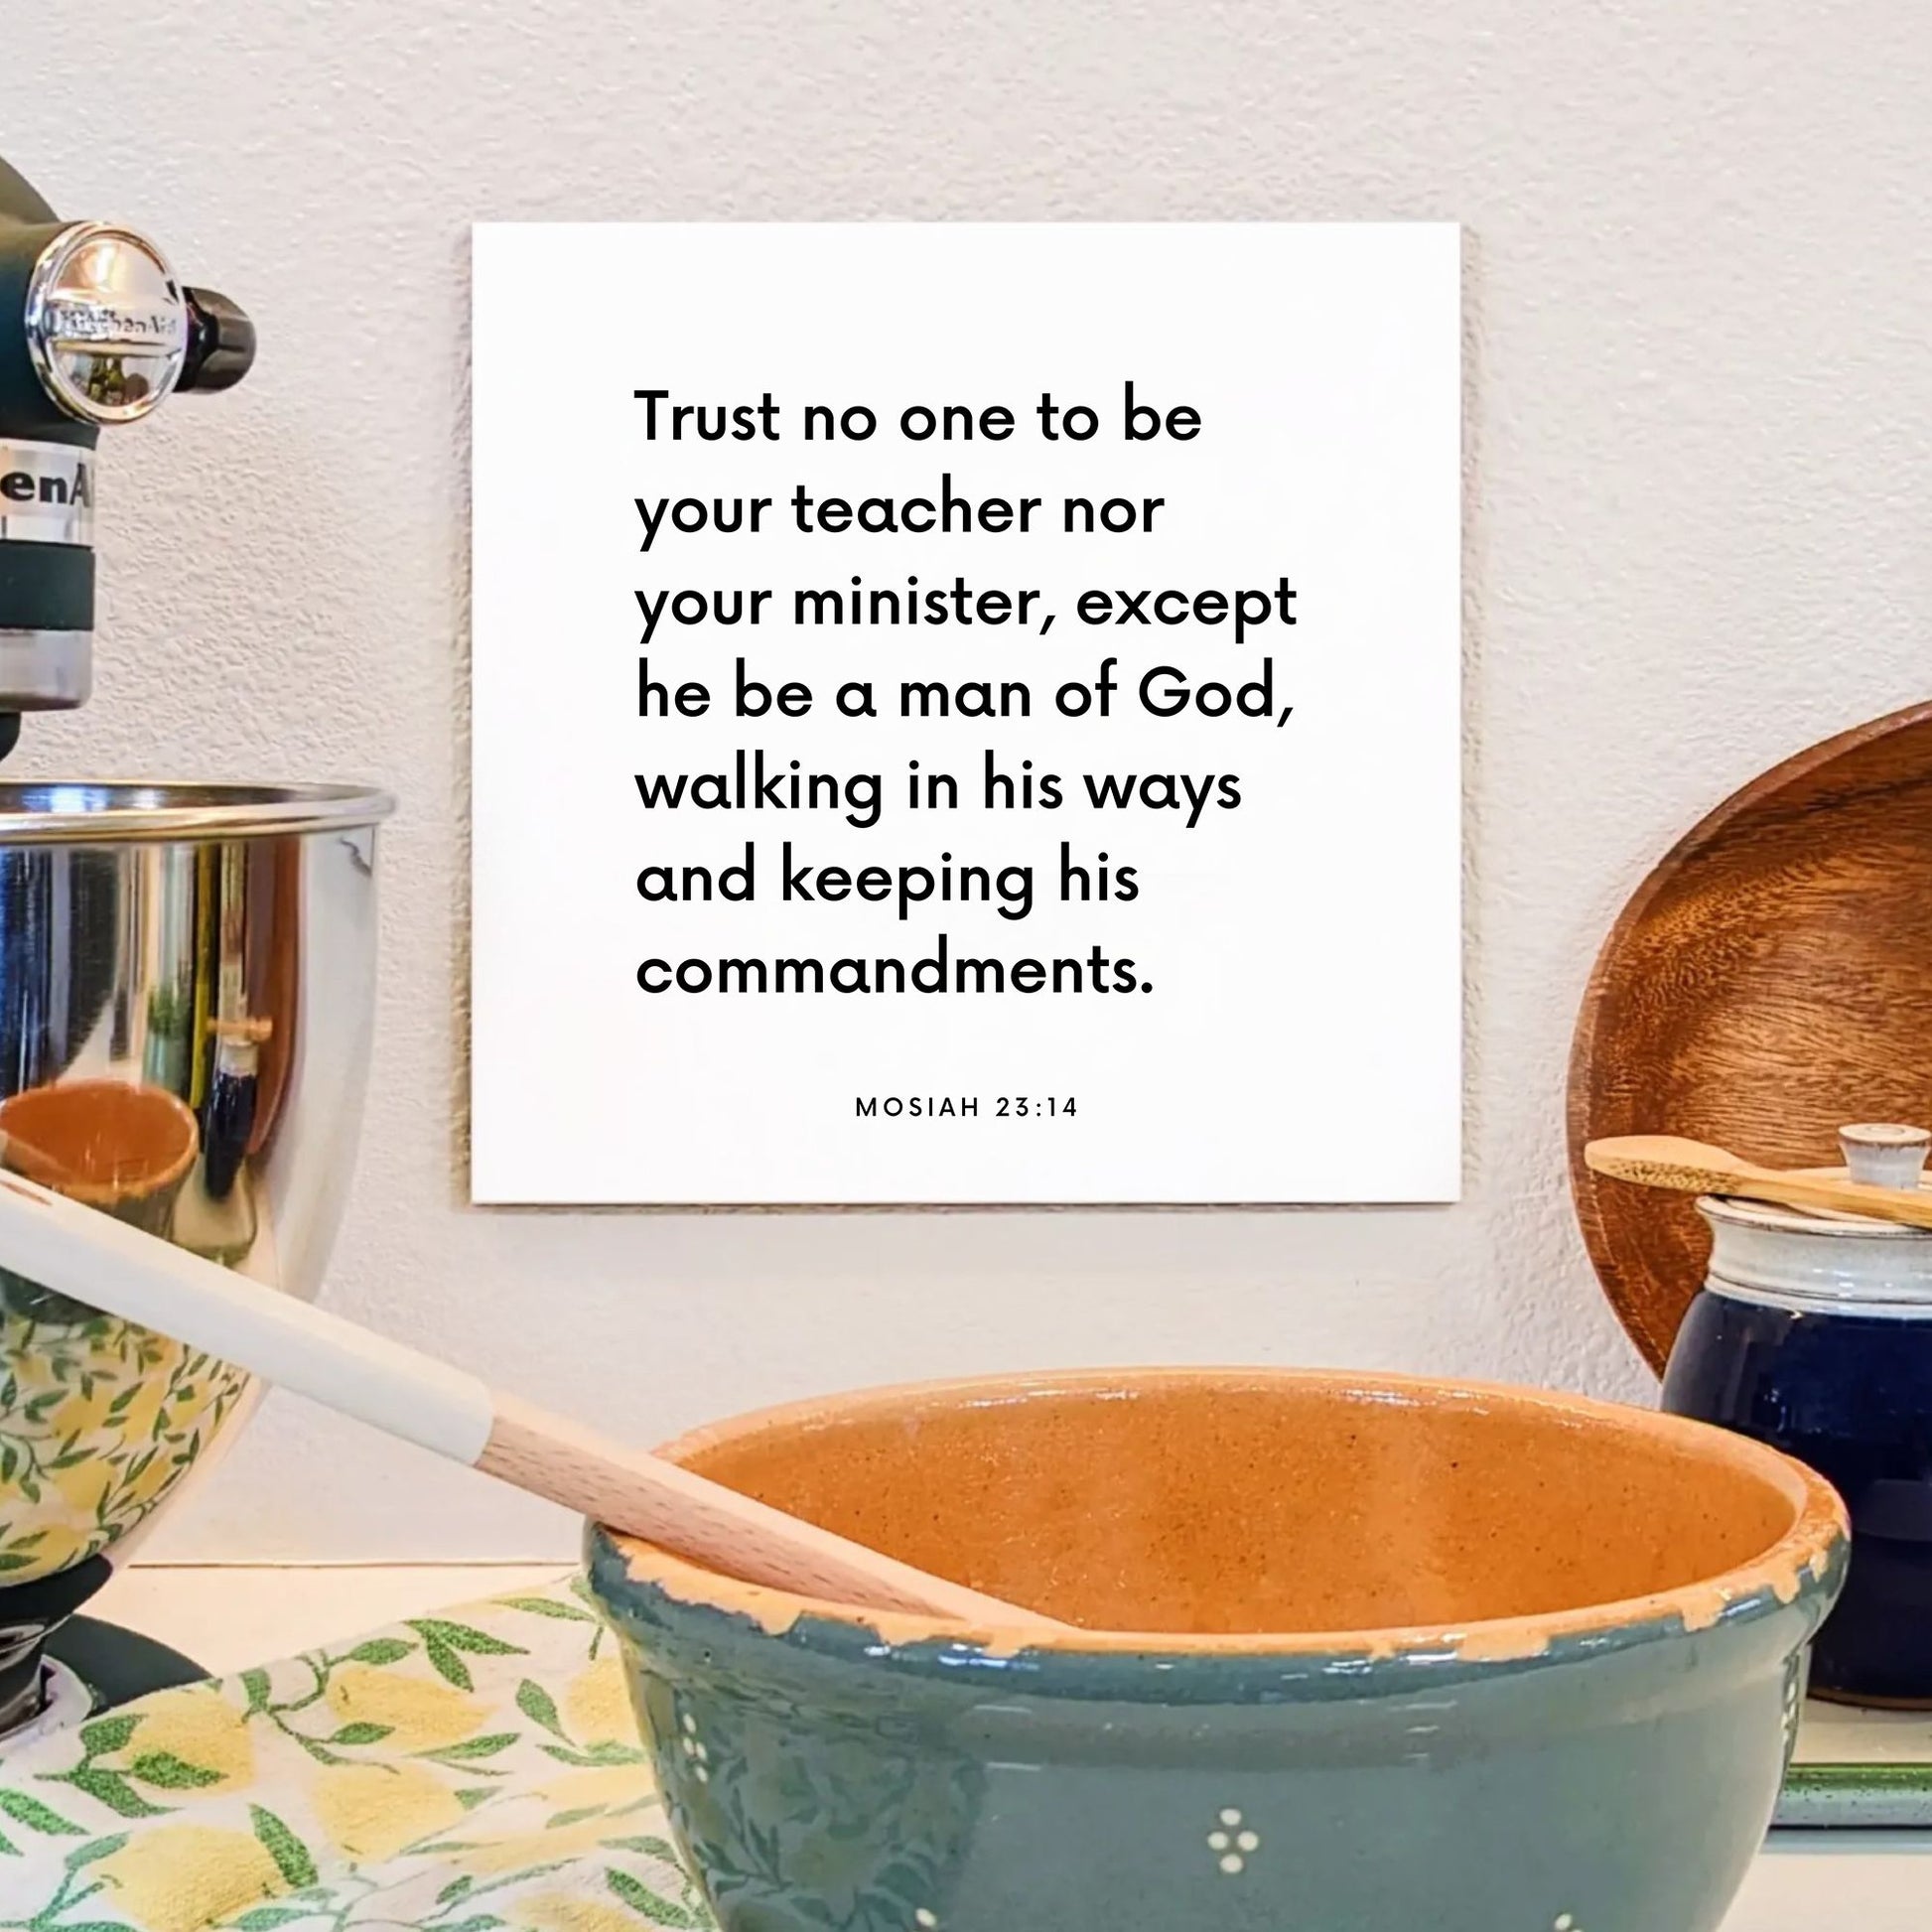 Kitchen mouting of the scripture tile for Mosiah 23:14 - "Trust no one to be your teacher, except he be a man of God"